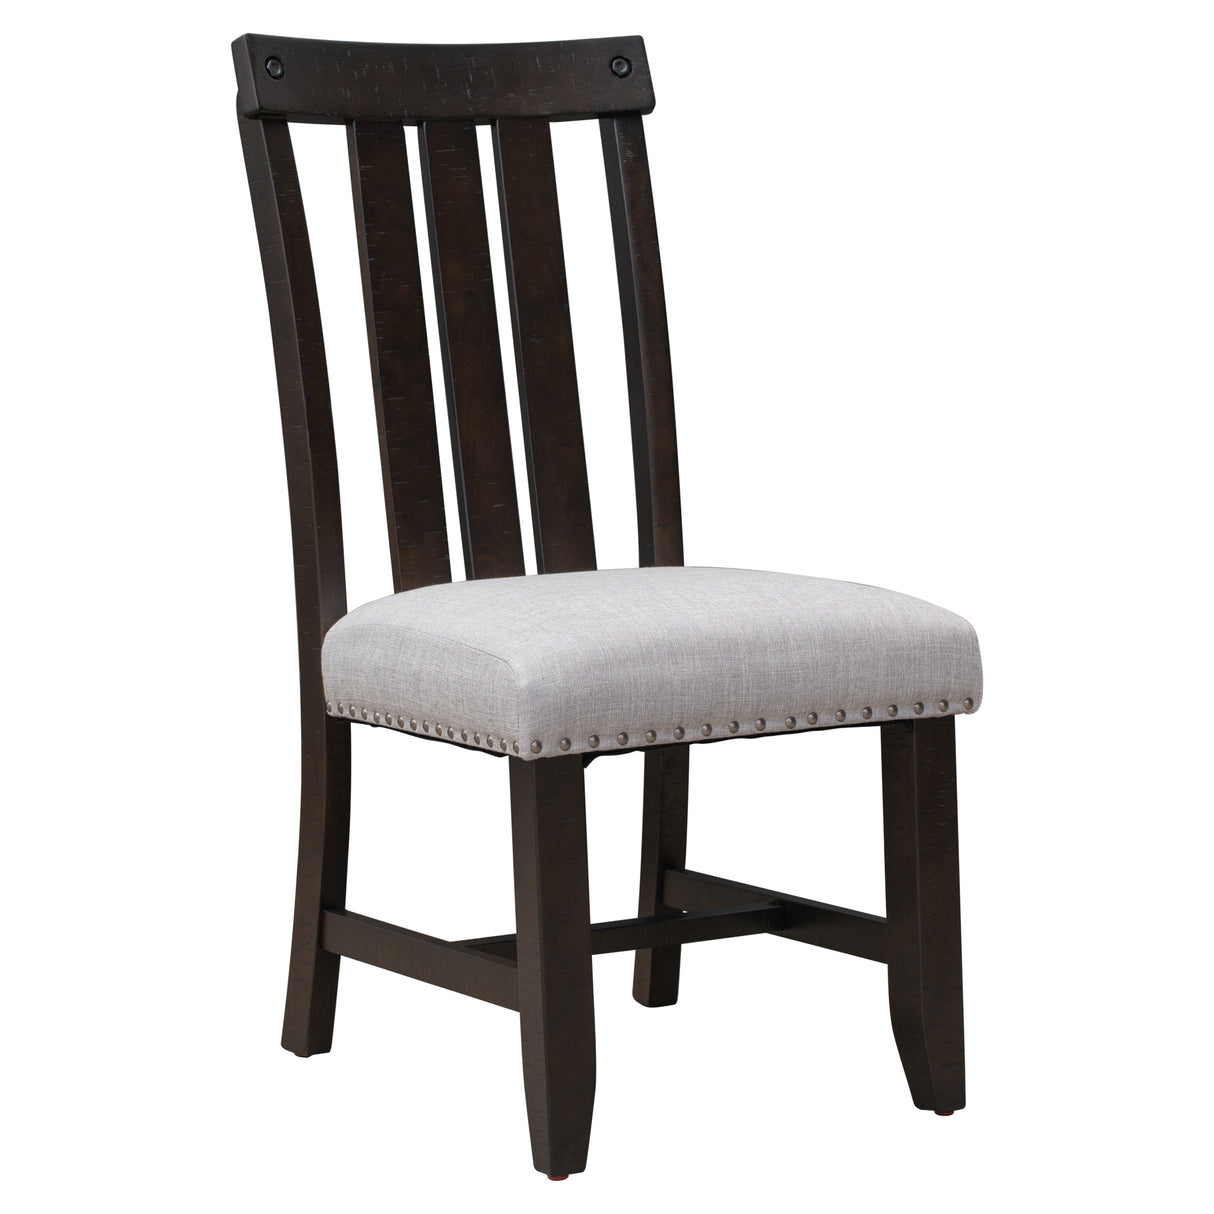 TREXM Set of 4 Fabric Upholstered Dining Chairs with Sliver Nails and Solid Wood Legs (Espresso) - Home Elegance USA